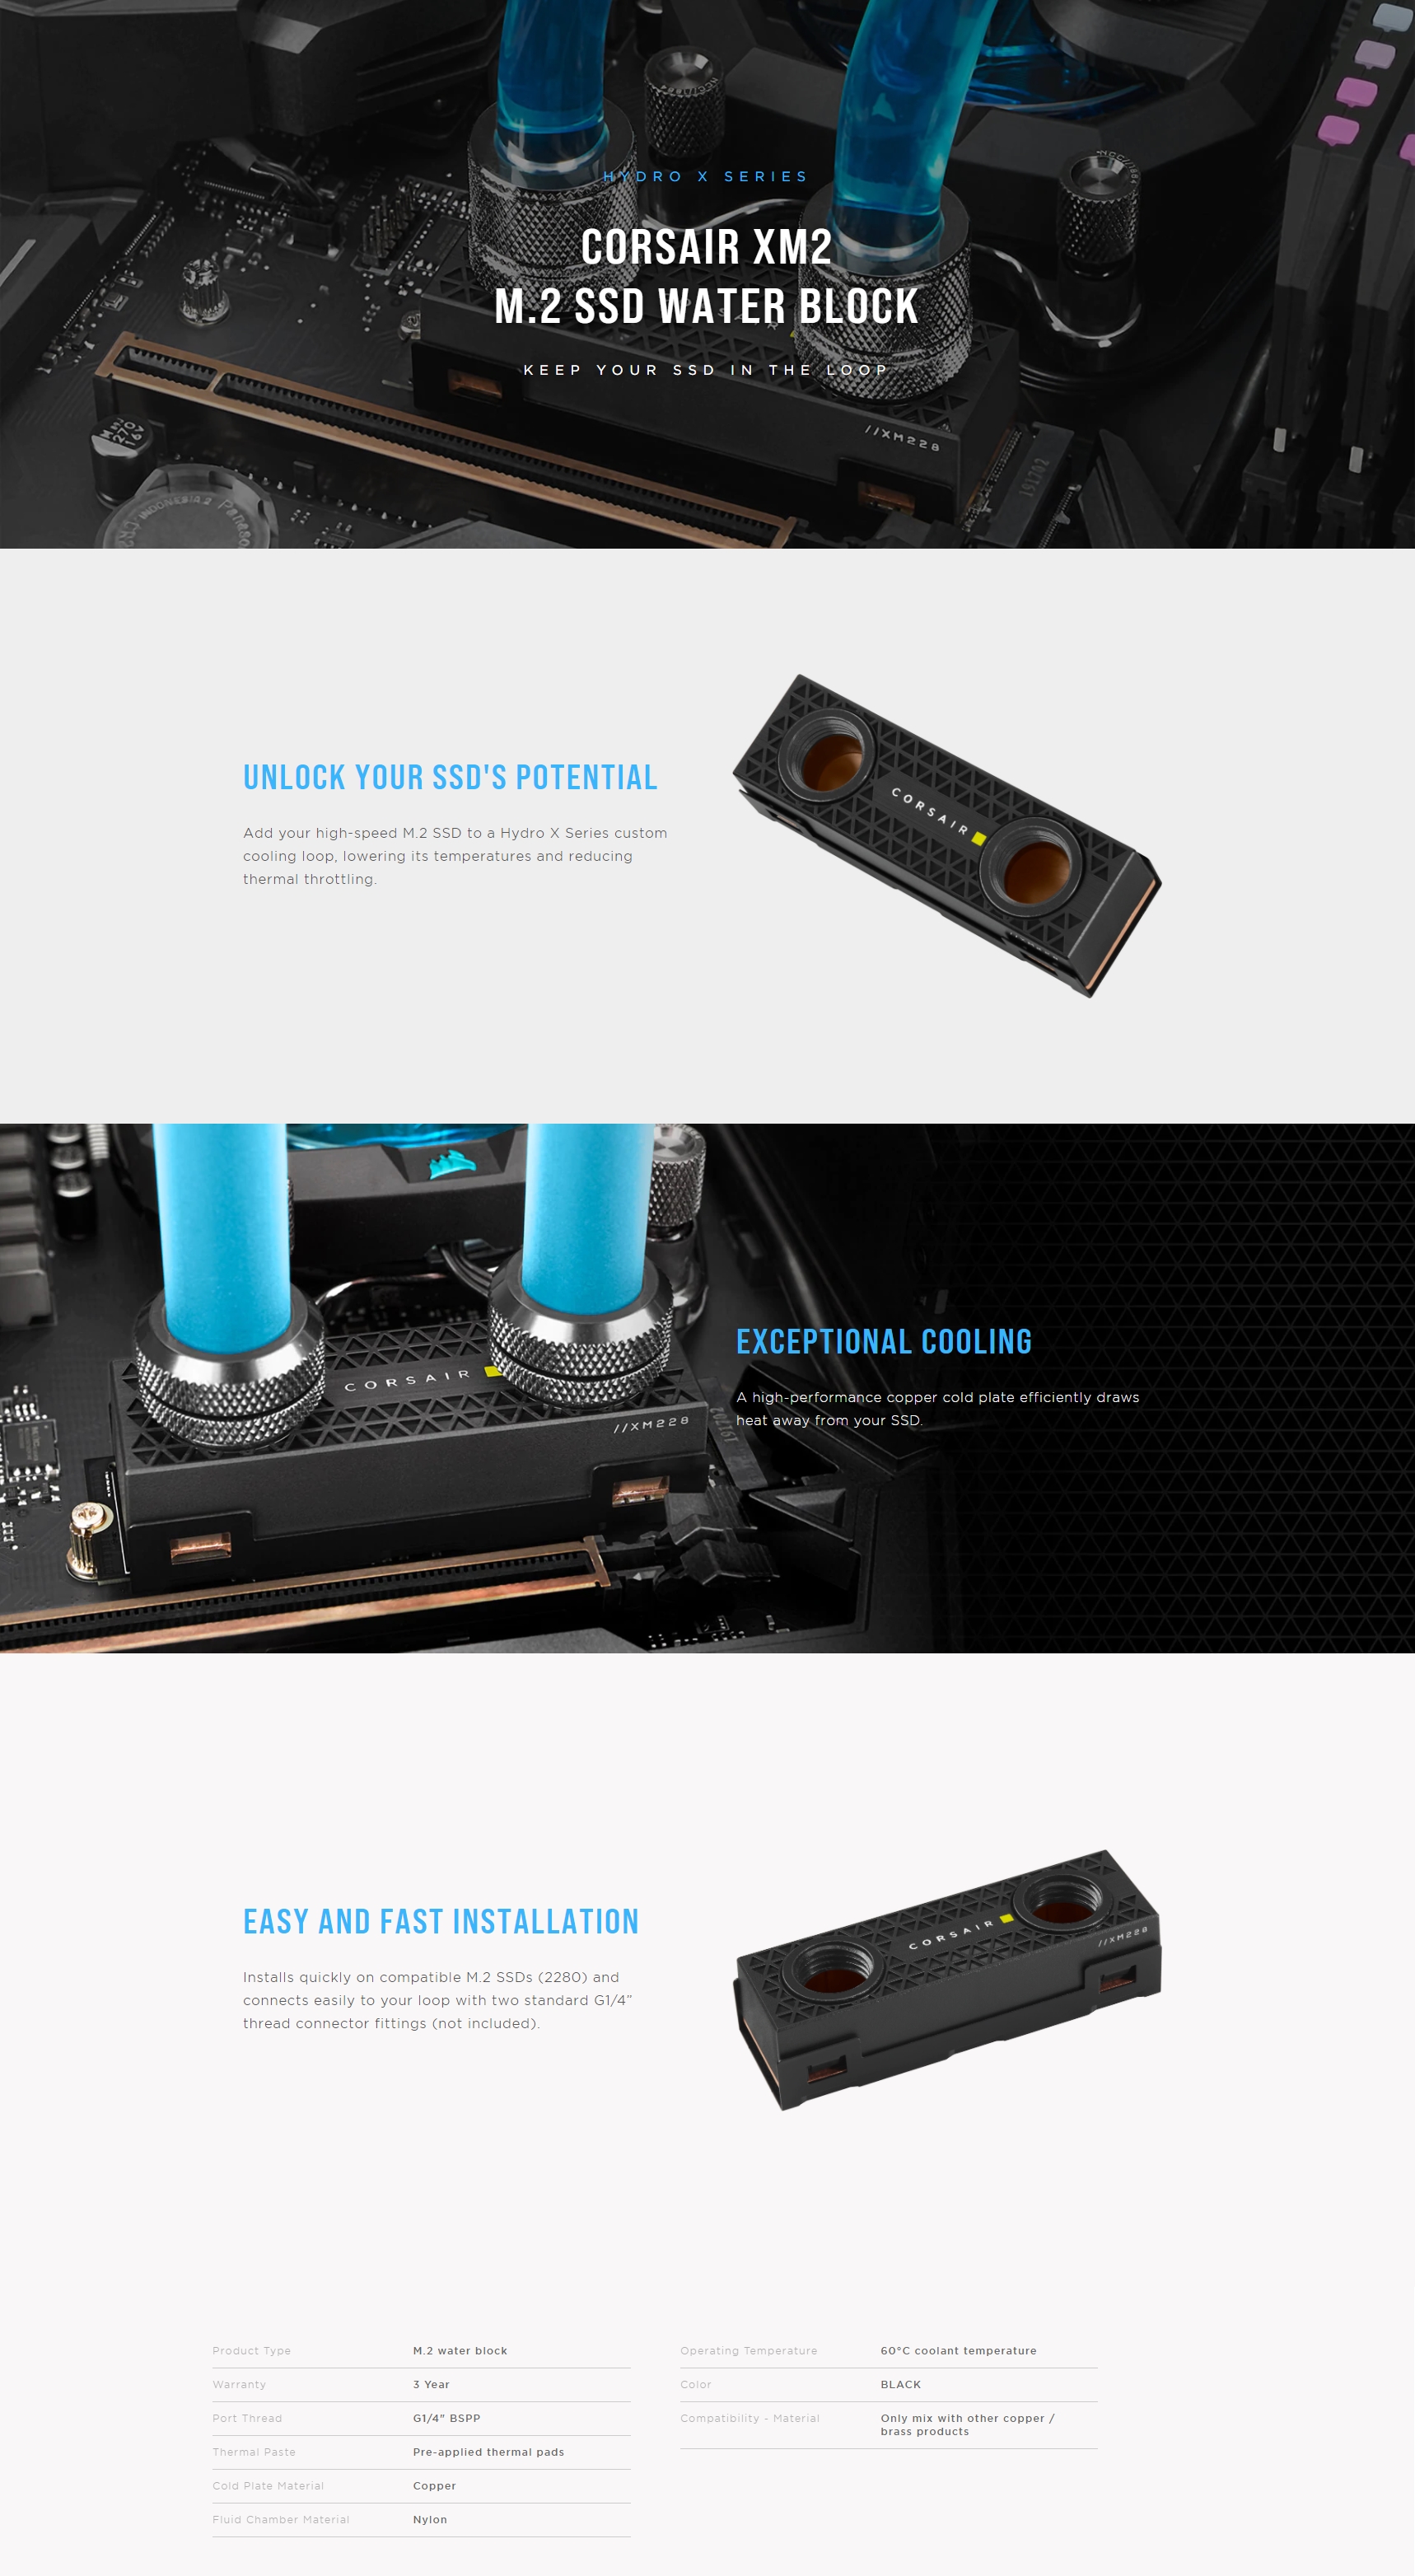 A large marketing image providing additional information about the product Corsair Hydro X Series XM2 M.2 SSD Water Block (2280) - Additional alt info not provided